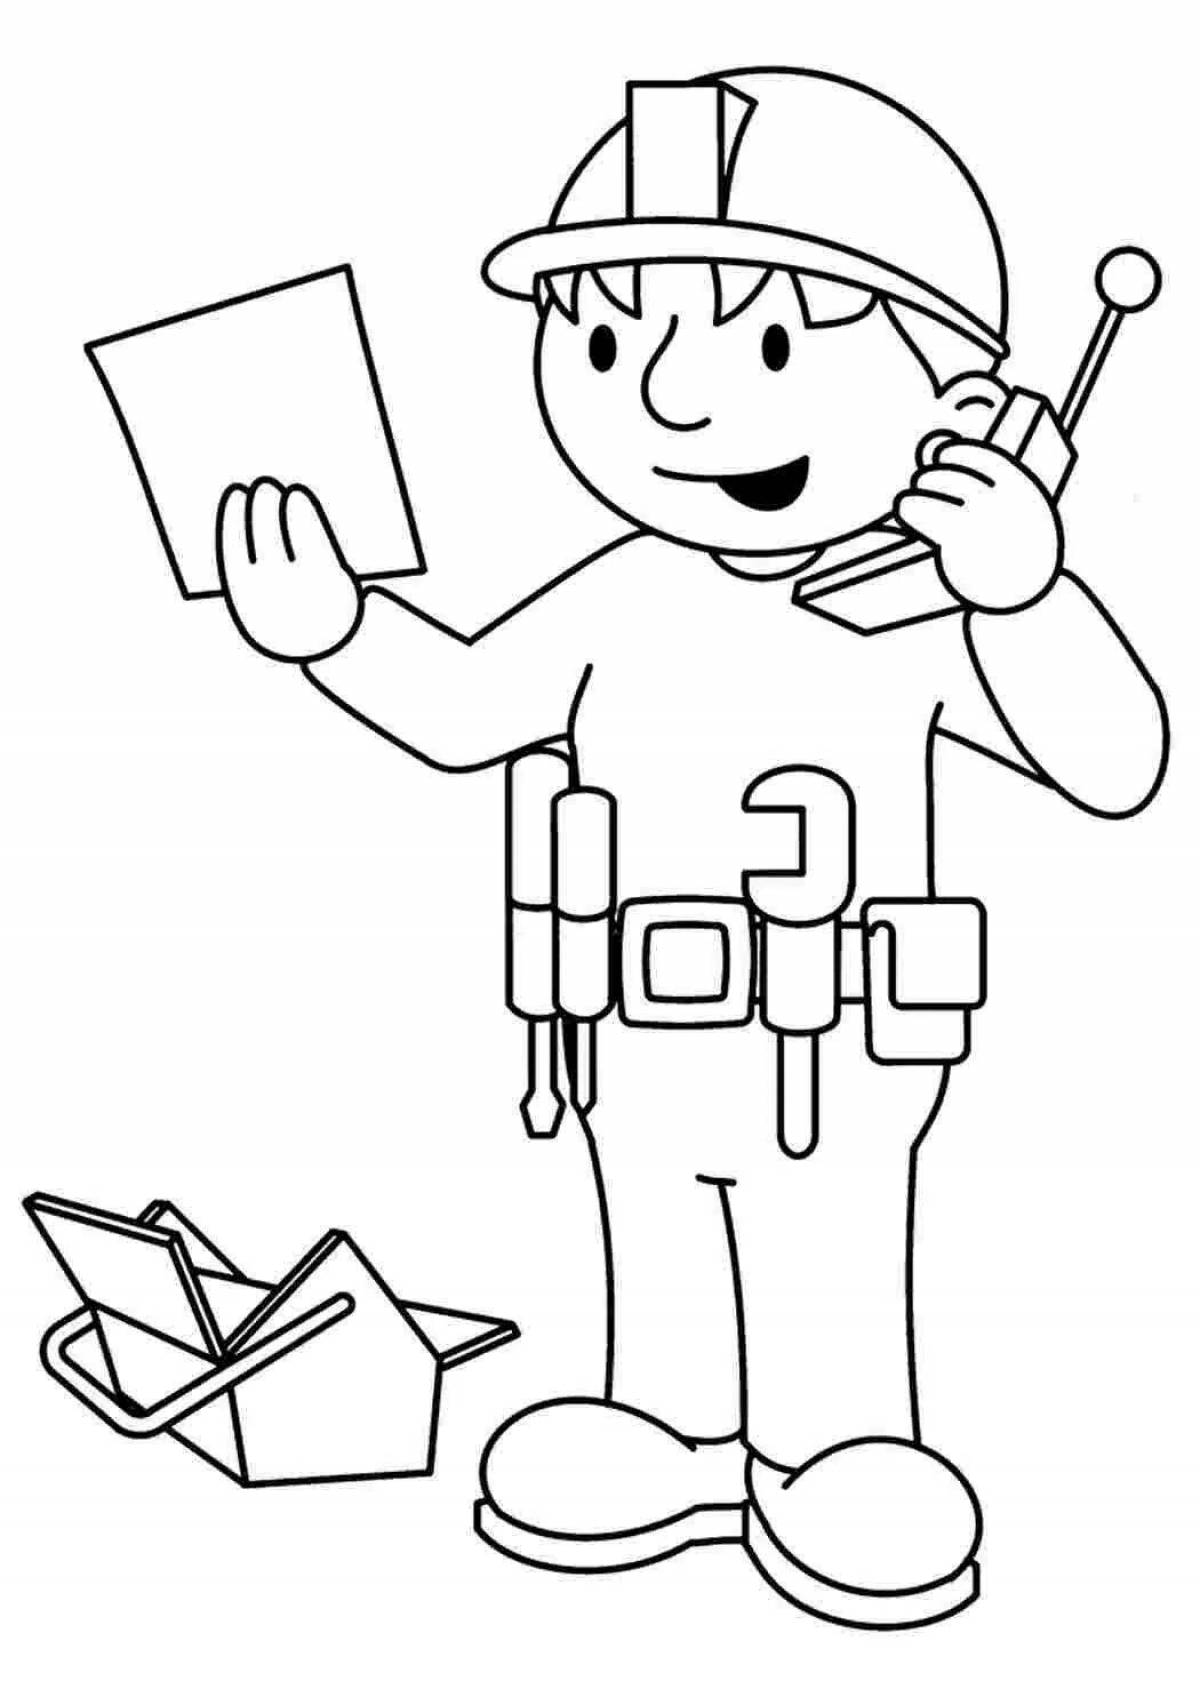 Coloring book entertaining construction professions